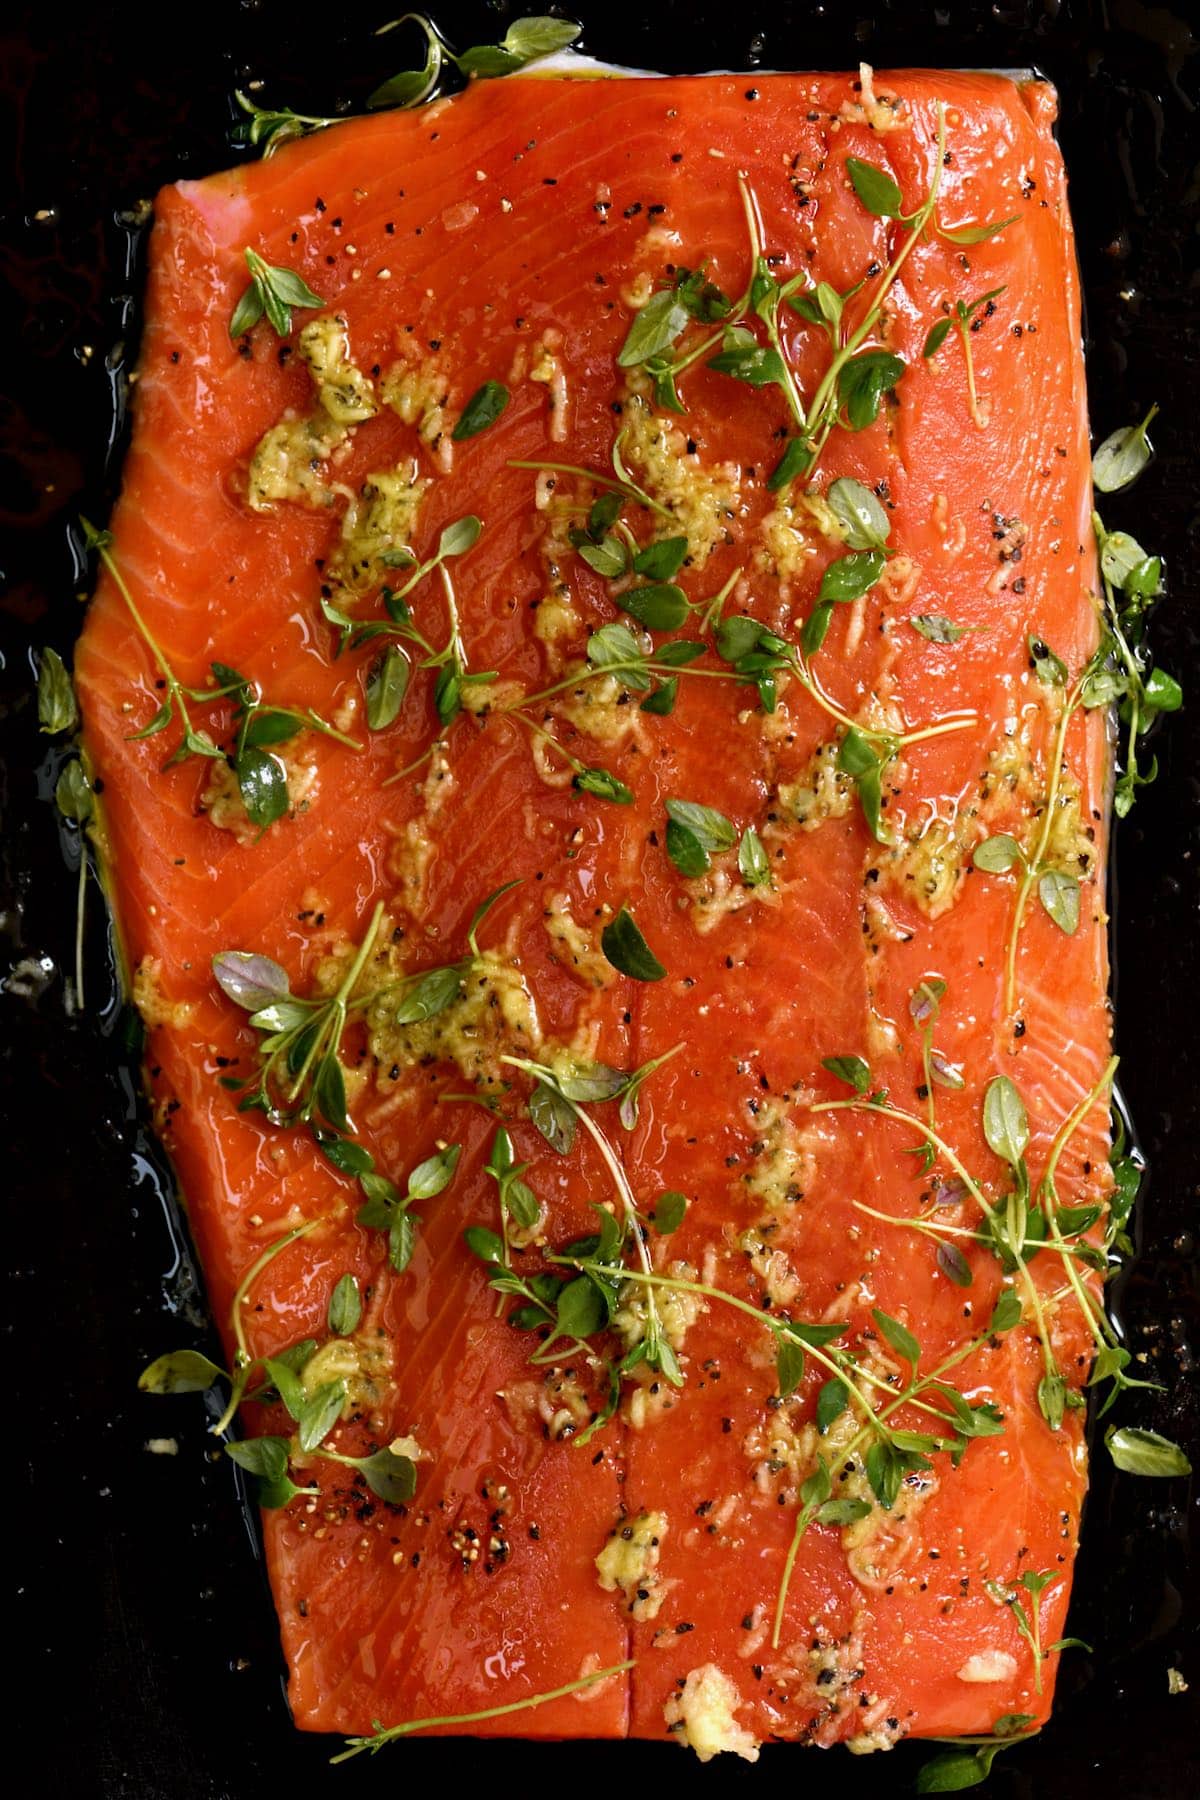 Raw salmon topped with minced garlic and herbs on baking tray